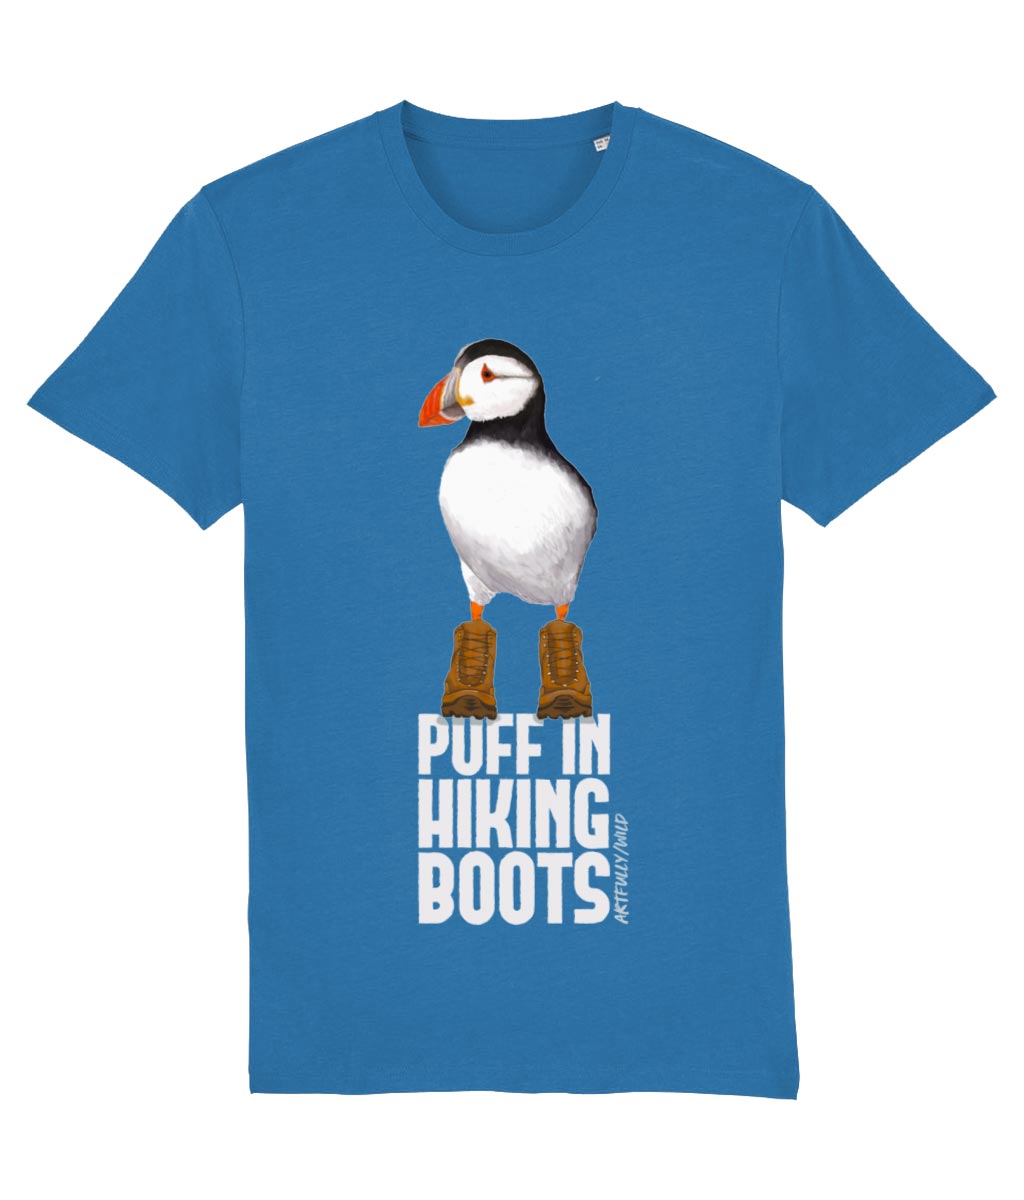 'PUFF IN HIKING BOOTS' Print on Royal Blue Organic T-Shirt. Unisex/Women/Men. Sustainable. Original Painted Illustration by Artfully/Wild. Printed in the UK with water-based inks.